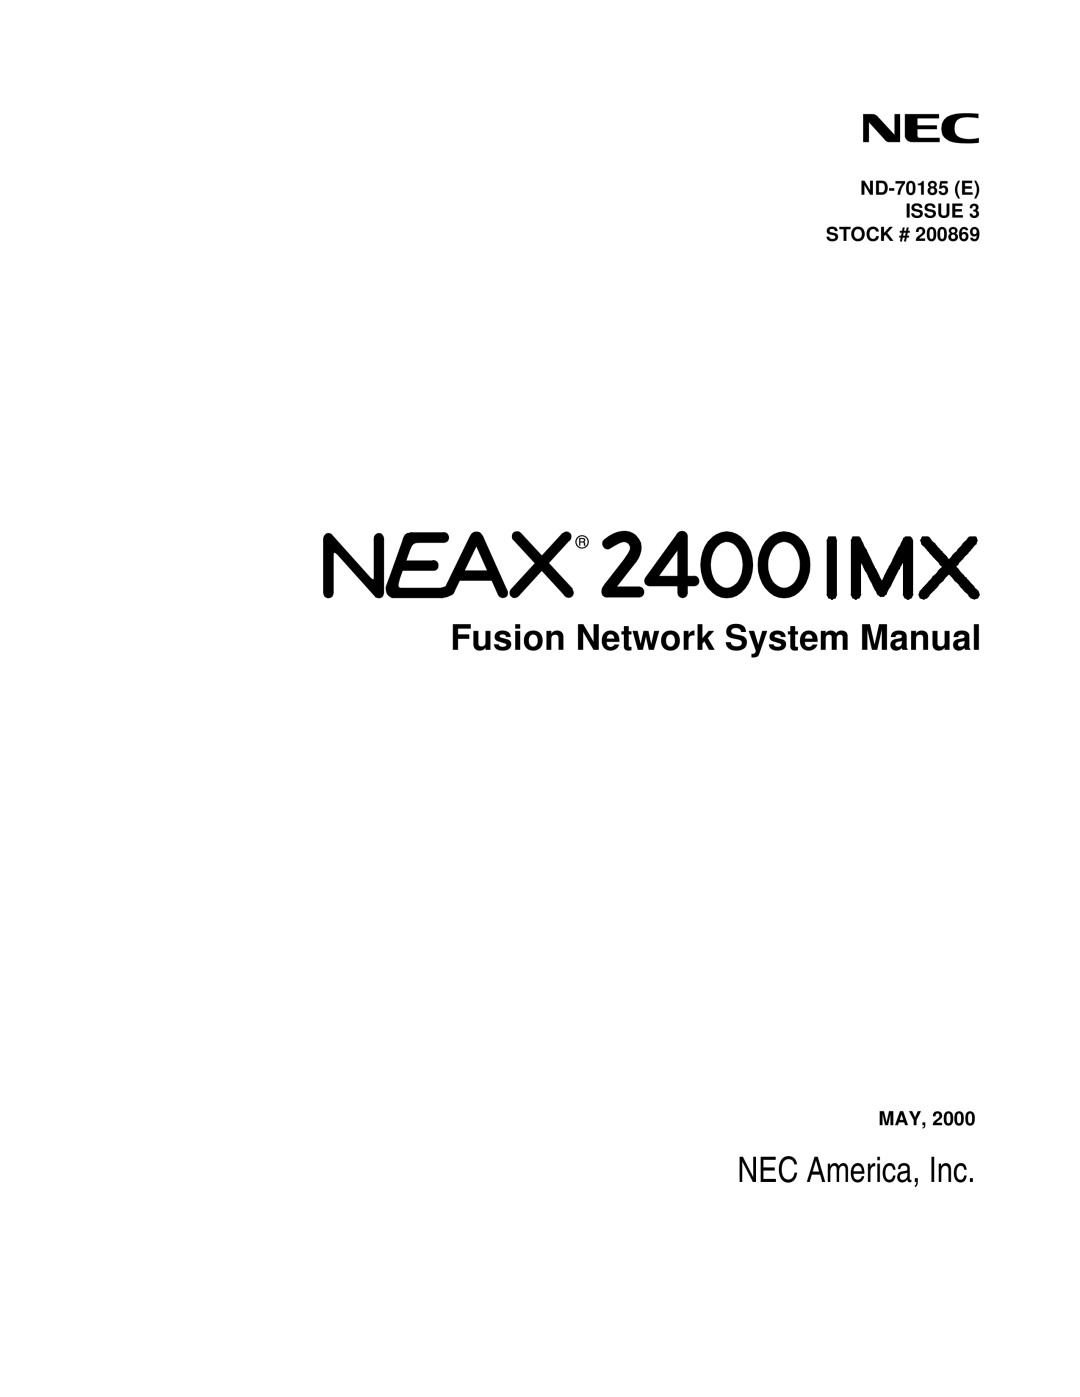 NEC NEAX2400 system manual ND-70185E ISSUE STOCK #, May, Fusion Network System Manual, NEC America, Inc 